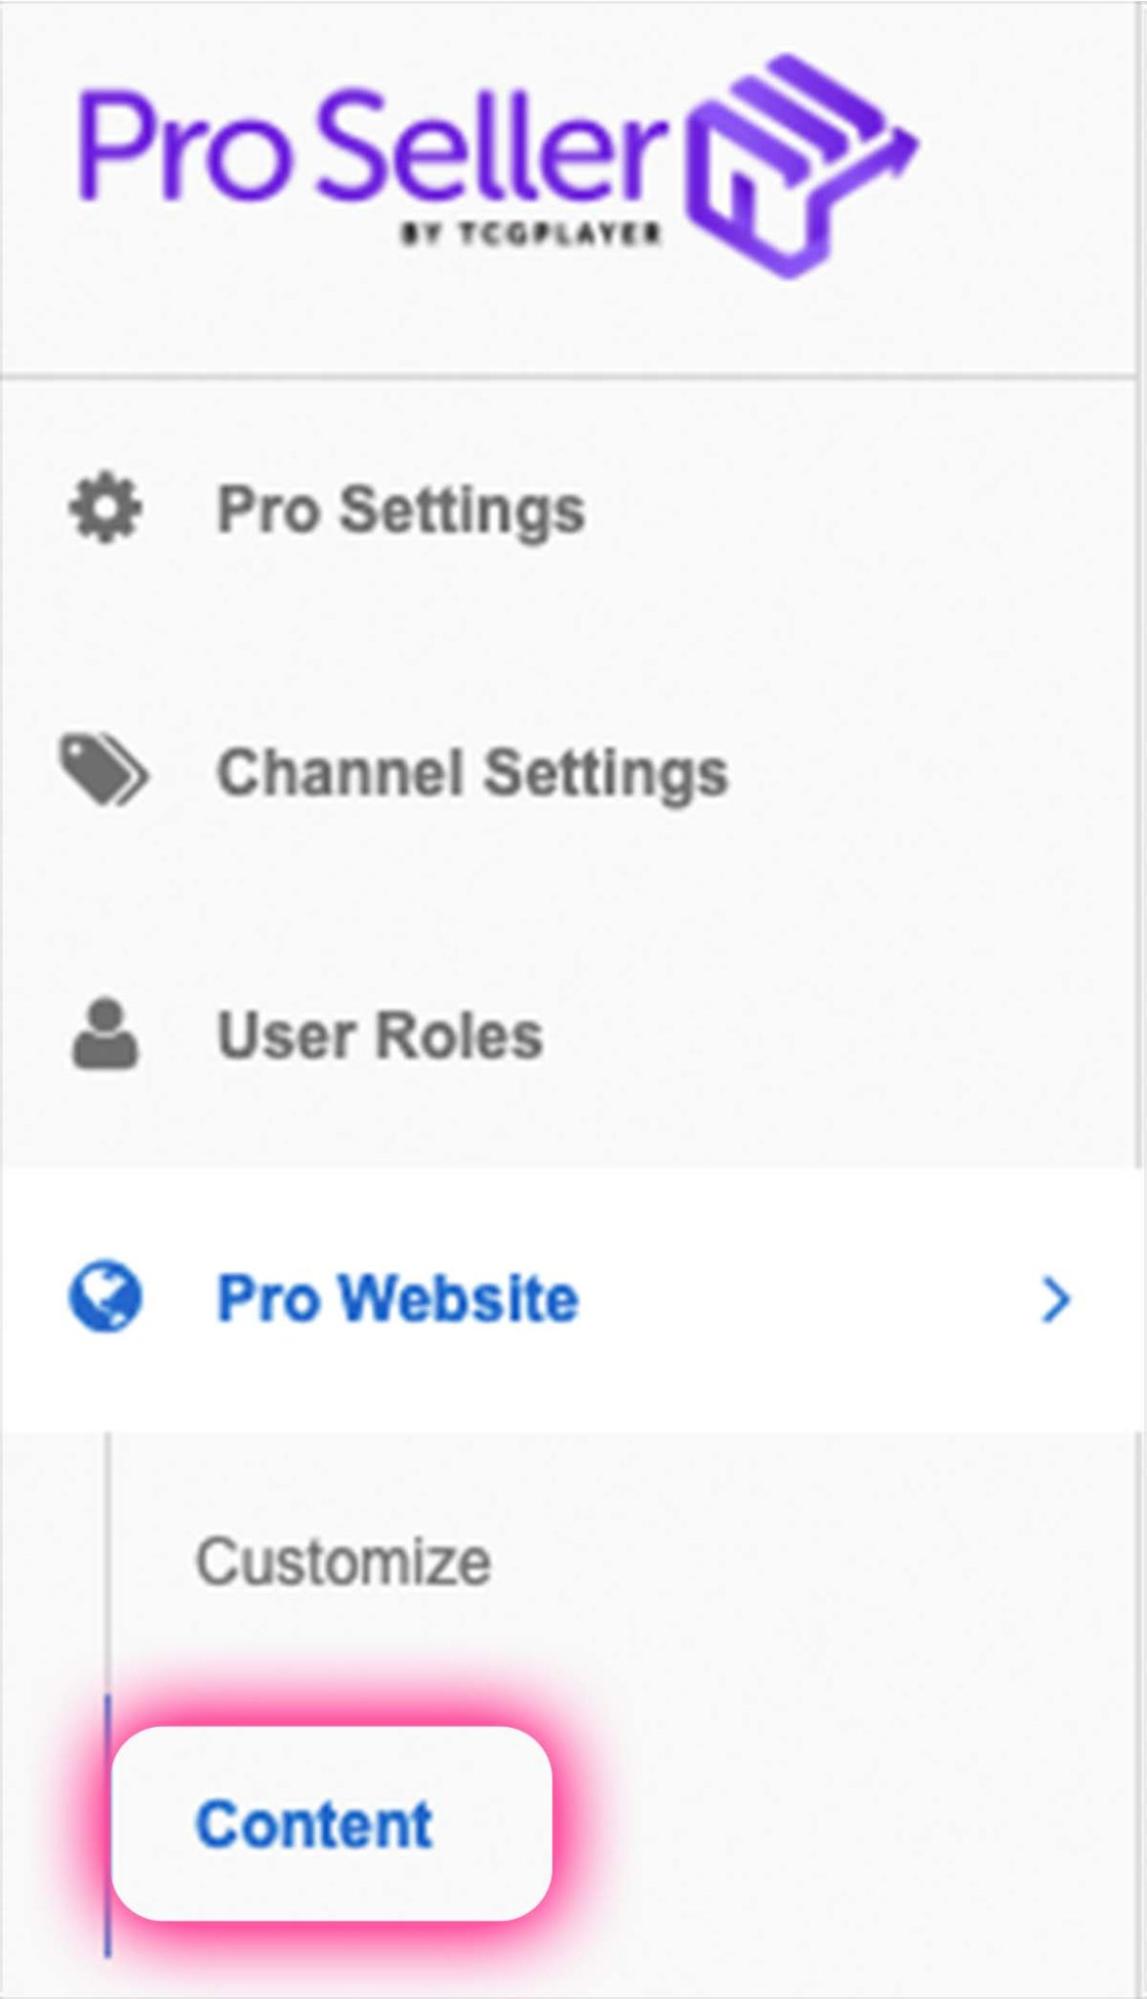 Content is located under Pro Website on the Pro Seller menu.